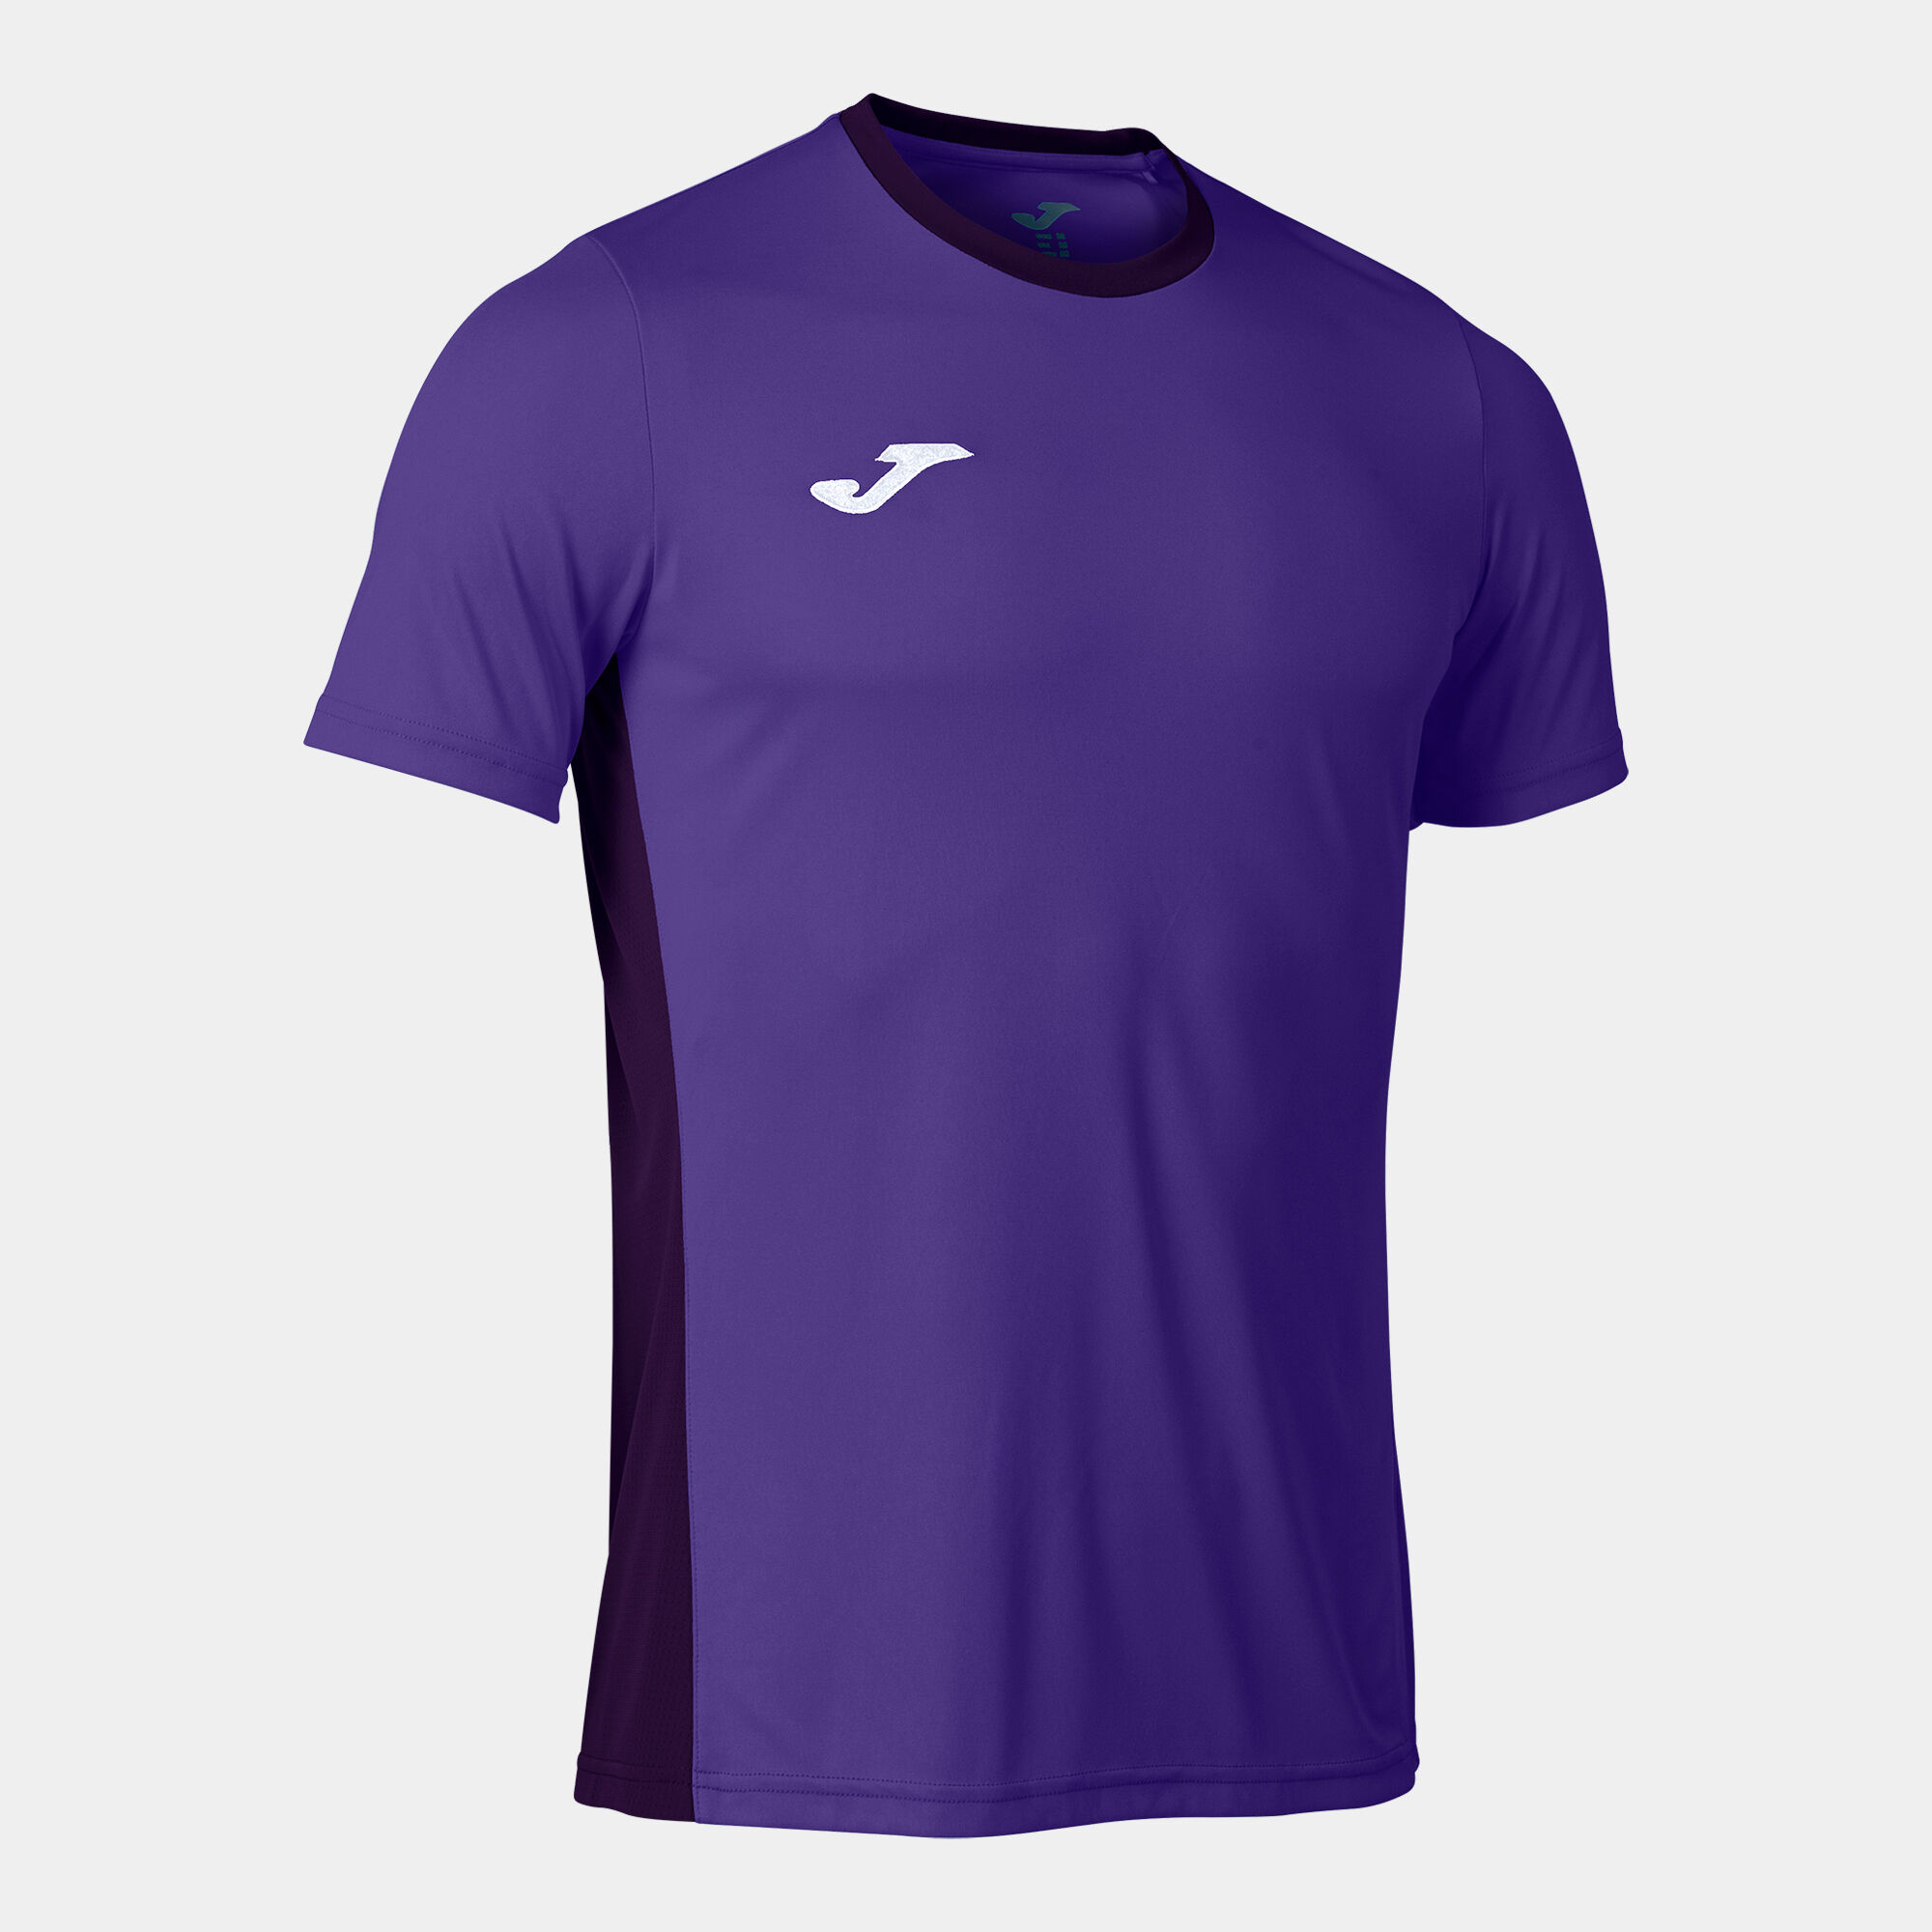 Maillot manches courtes homme Winner II violet